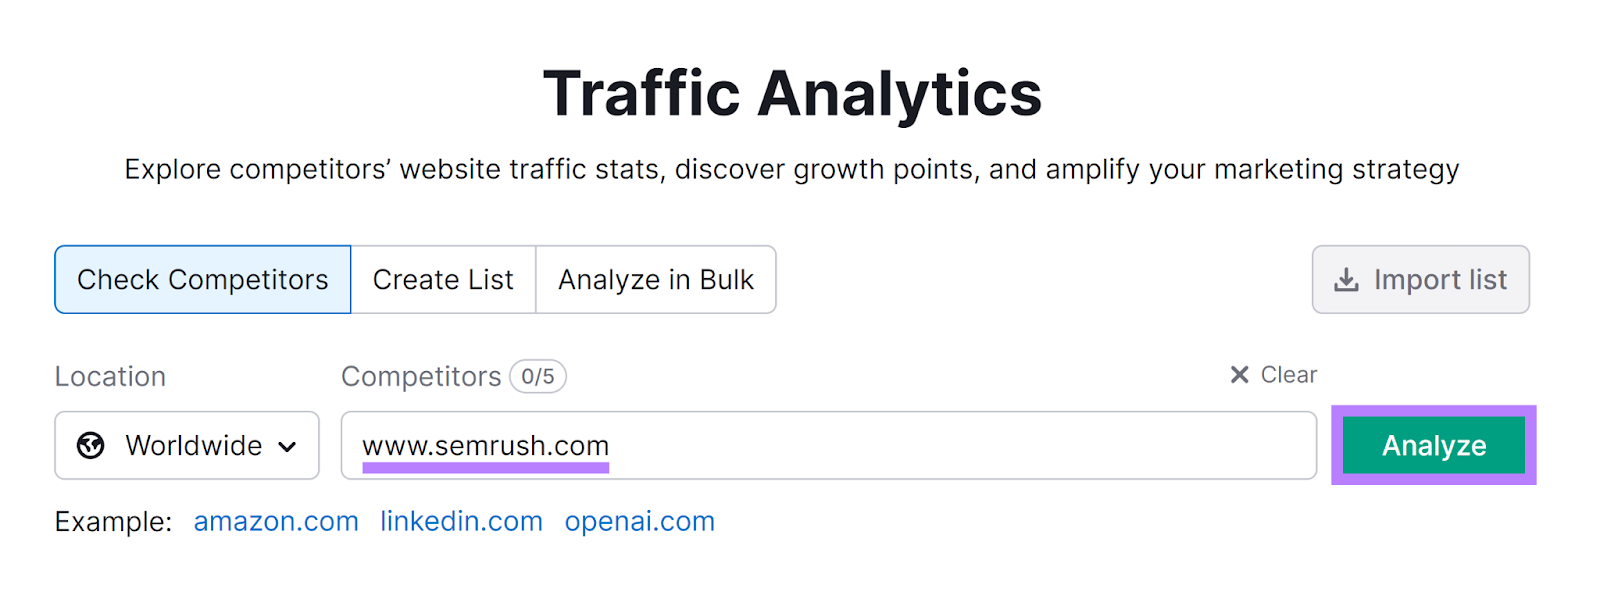 Semrush Traffic Analytics tool start page with domain and Analyze button highlighted.